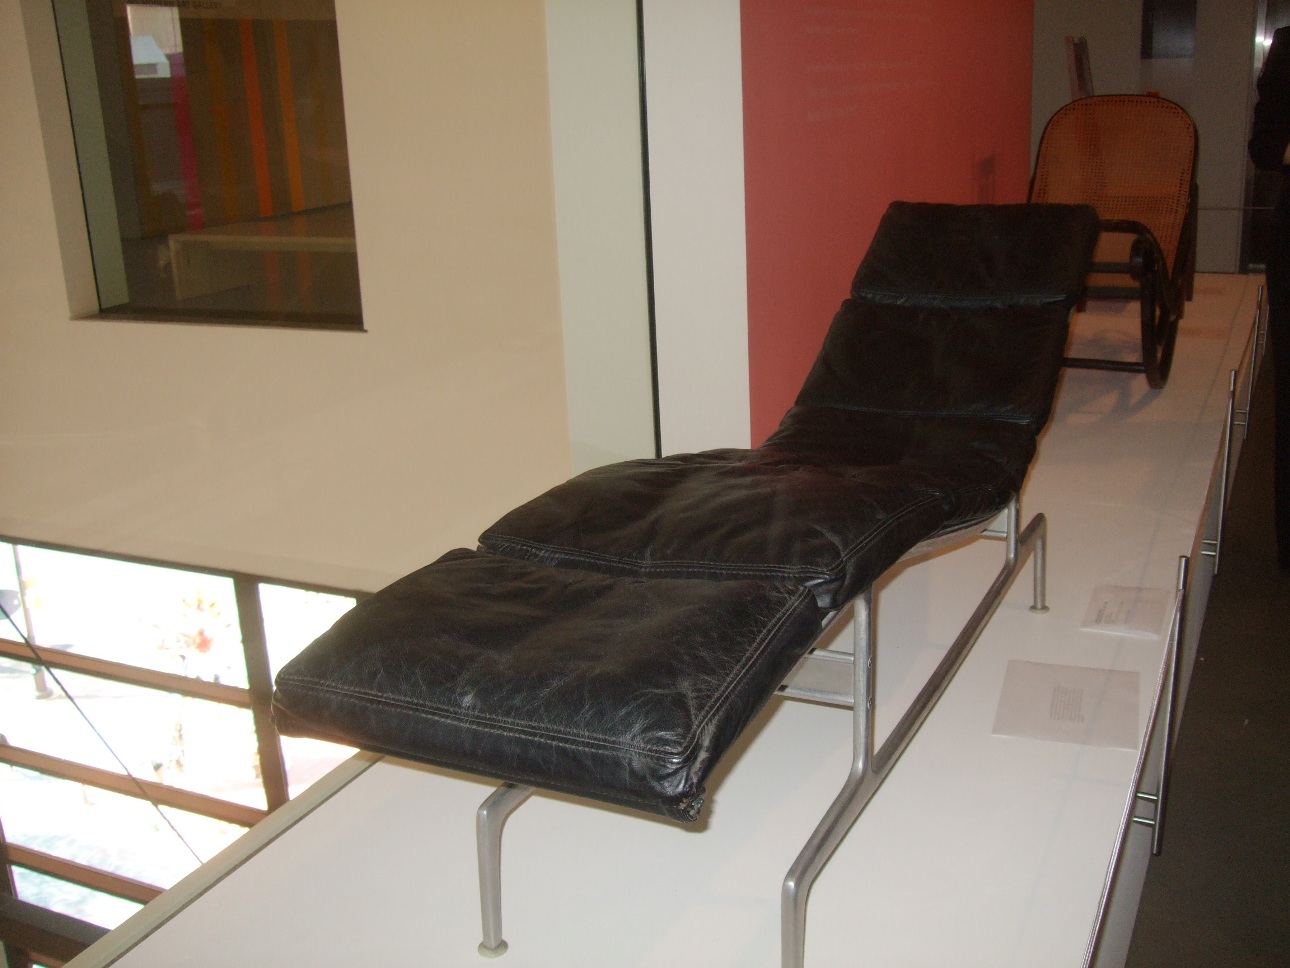 CHARLOTTE FIVE – Why Billy Wilder’s Couch is on Display at the Bechtler.